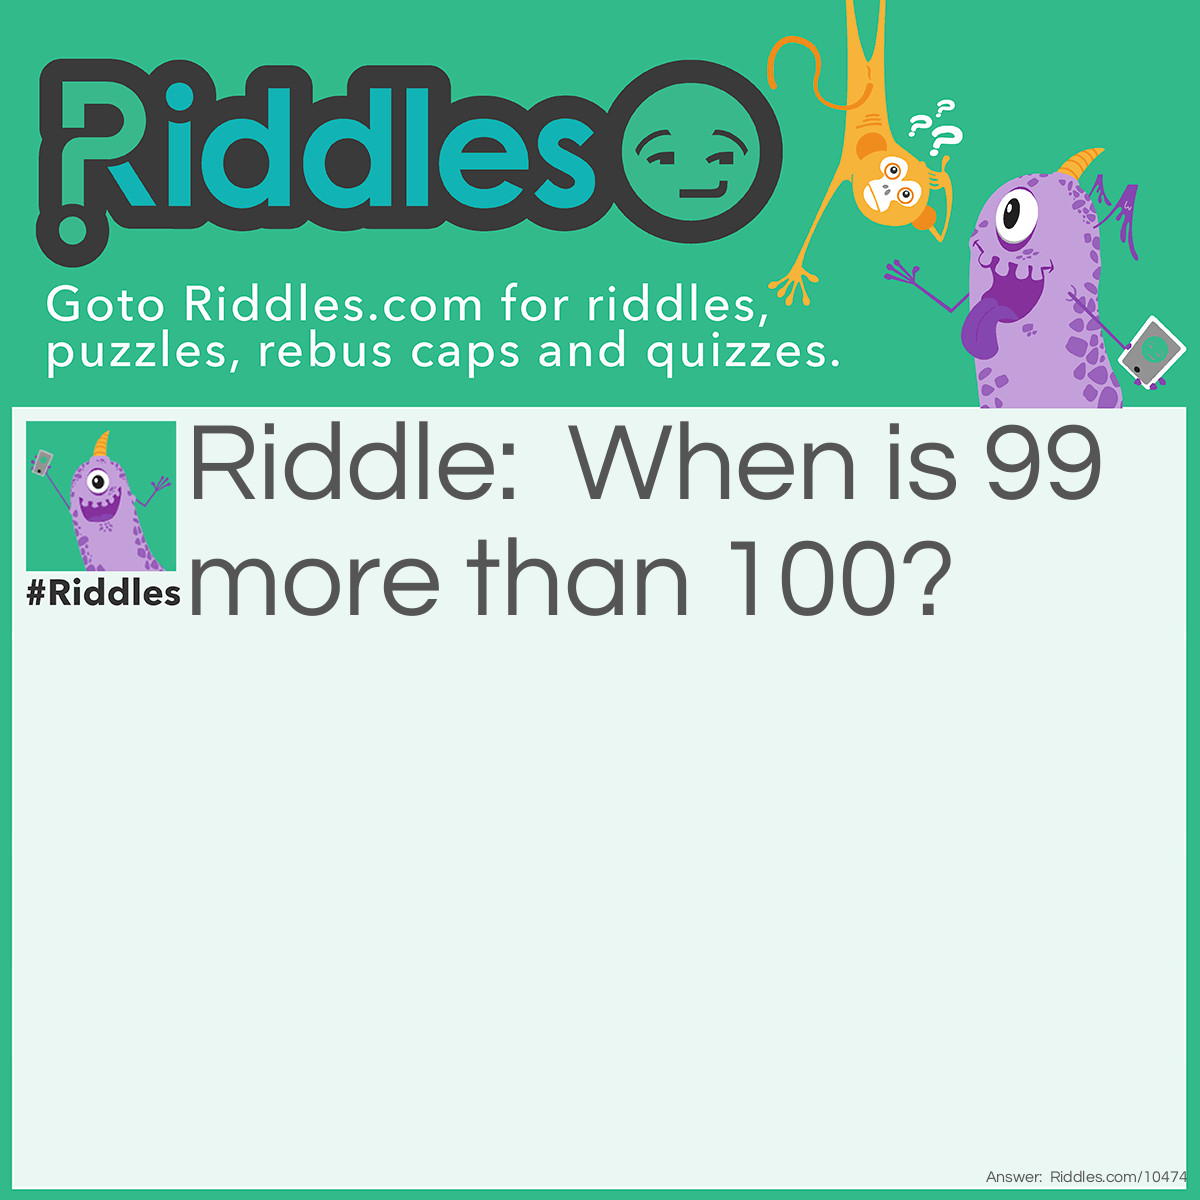 Riddle: When is 99 more than 100? Answer: The Answer to "When Is 99 More Than 100" Riddle is that generally when you run a microwave for '99' it runs for 1 minute and 39 seconds. '100' runs for 1 minute